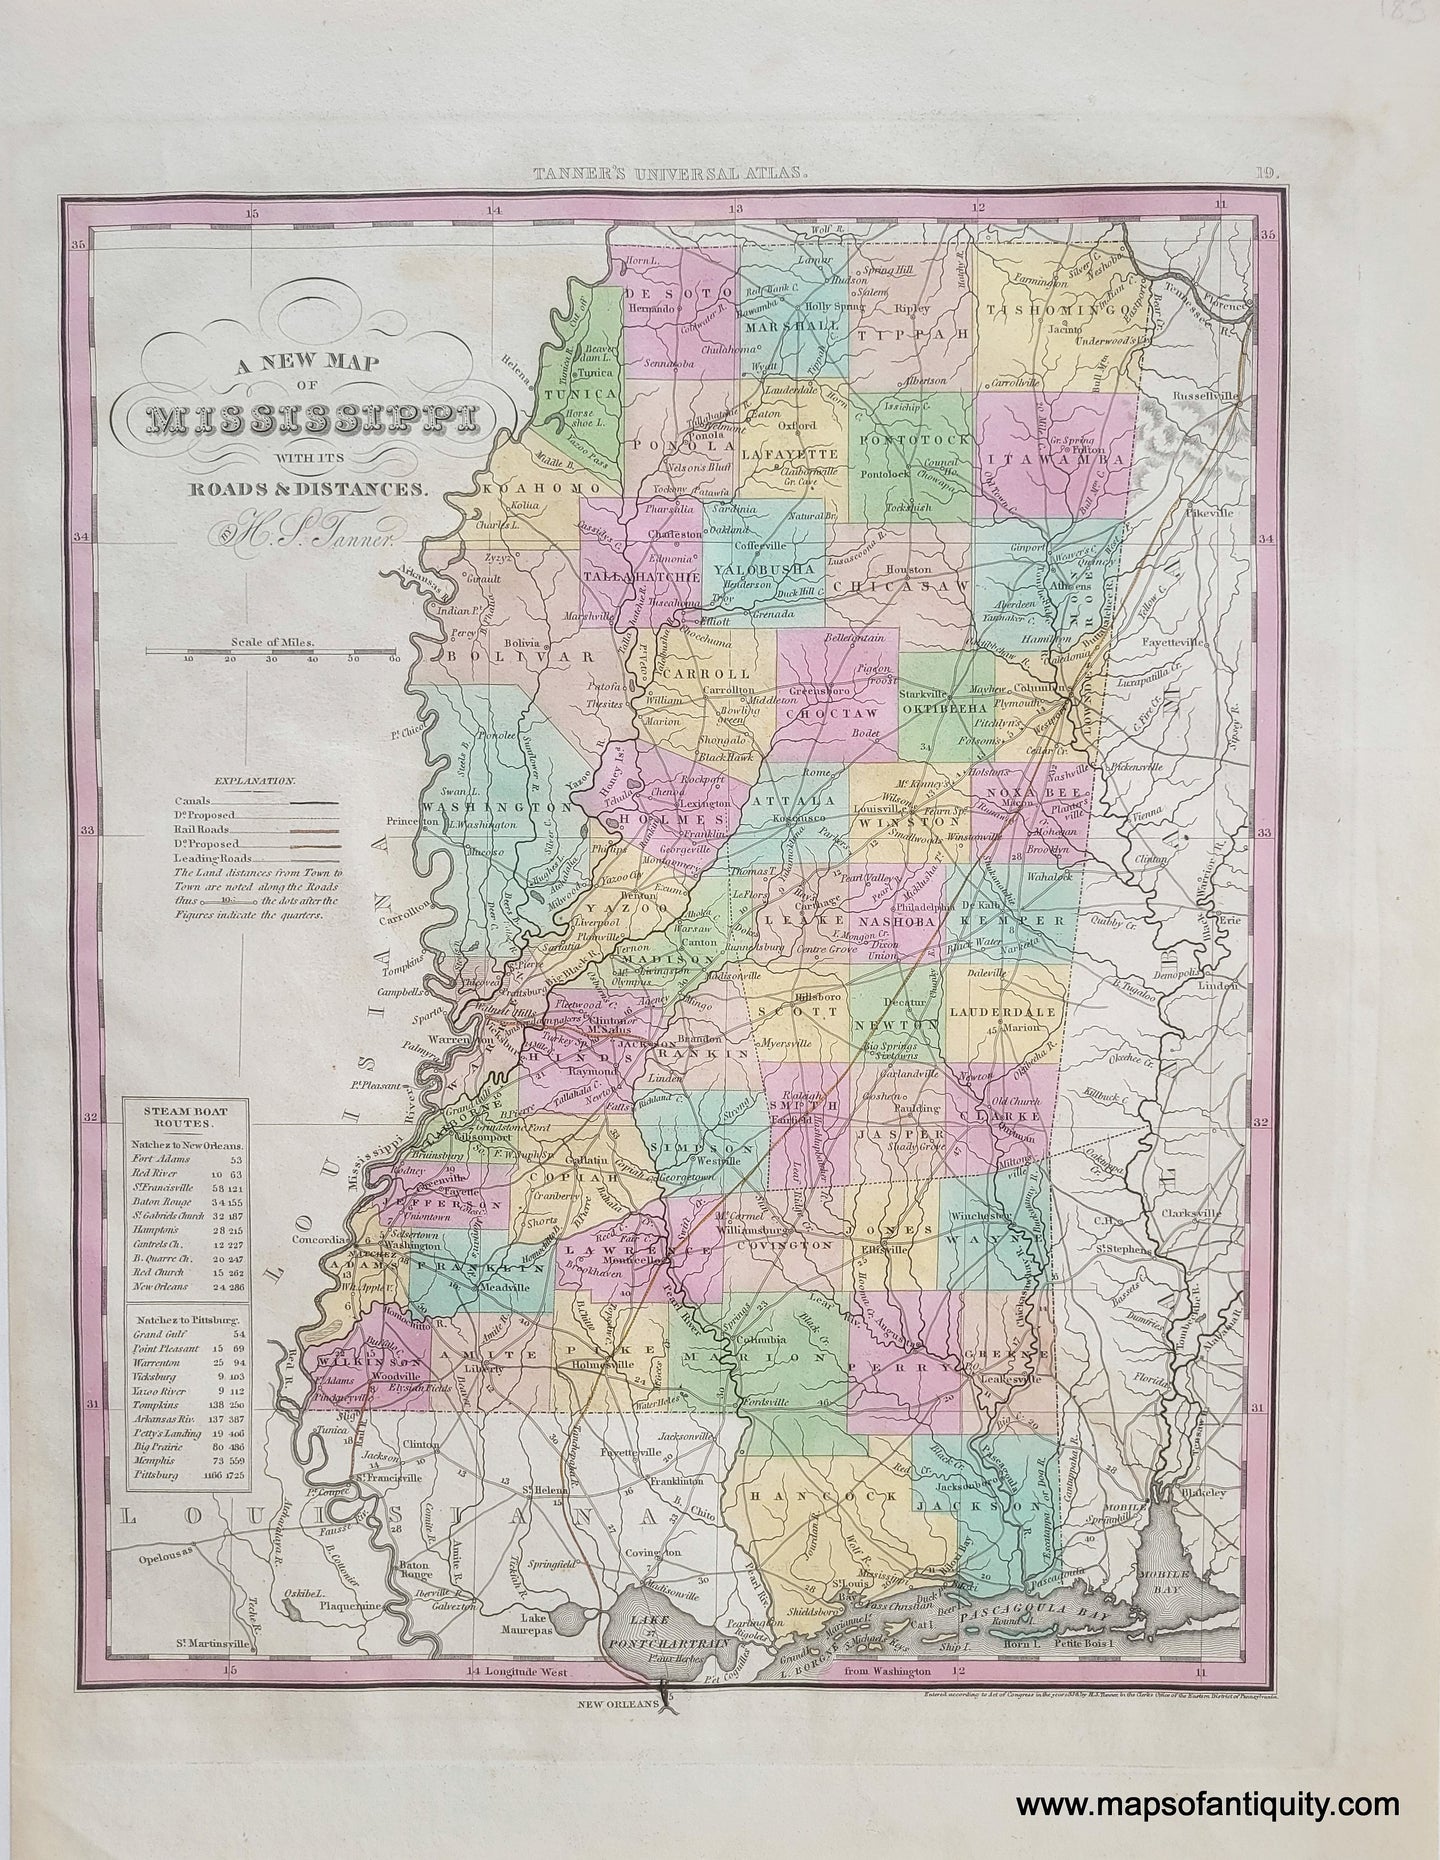 1836 - A New Map of Mississippi with its Roads and Distances. - Antique Map